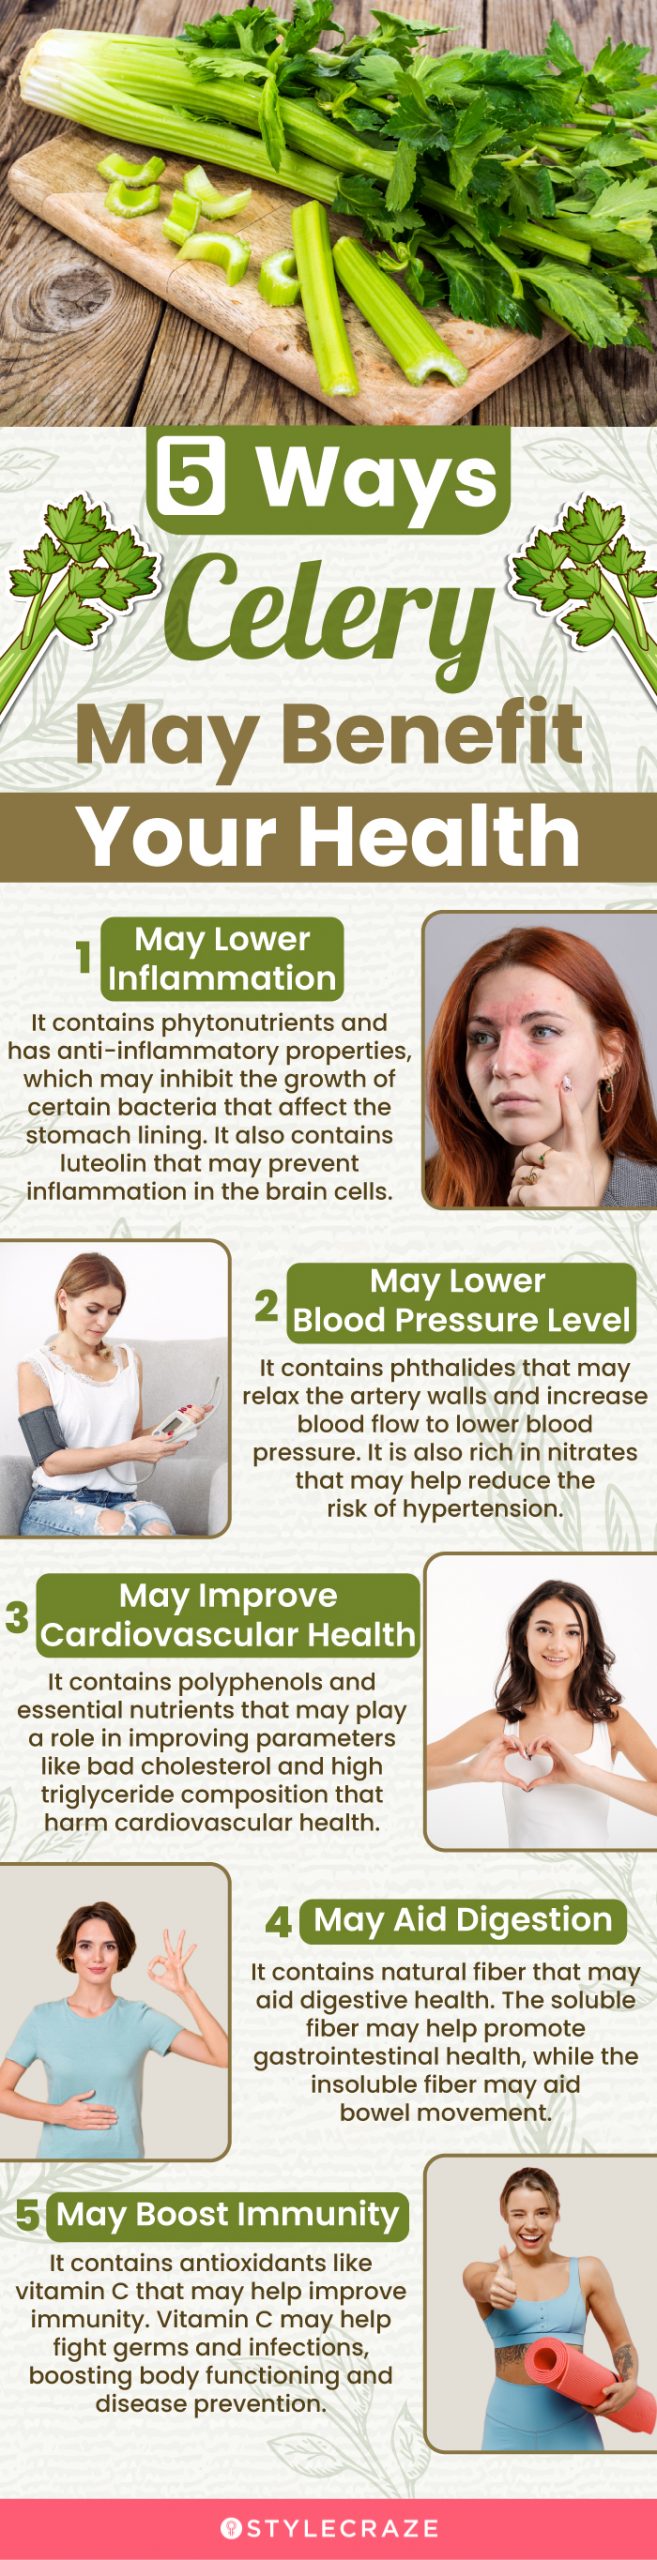 5 ways celery may benefit your health (infographic)